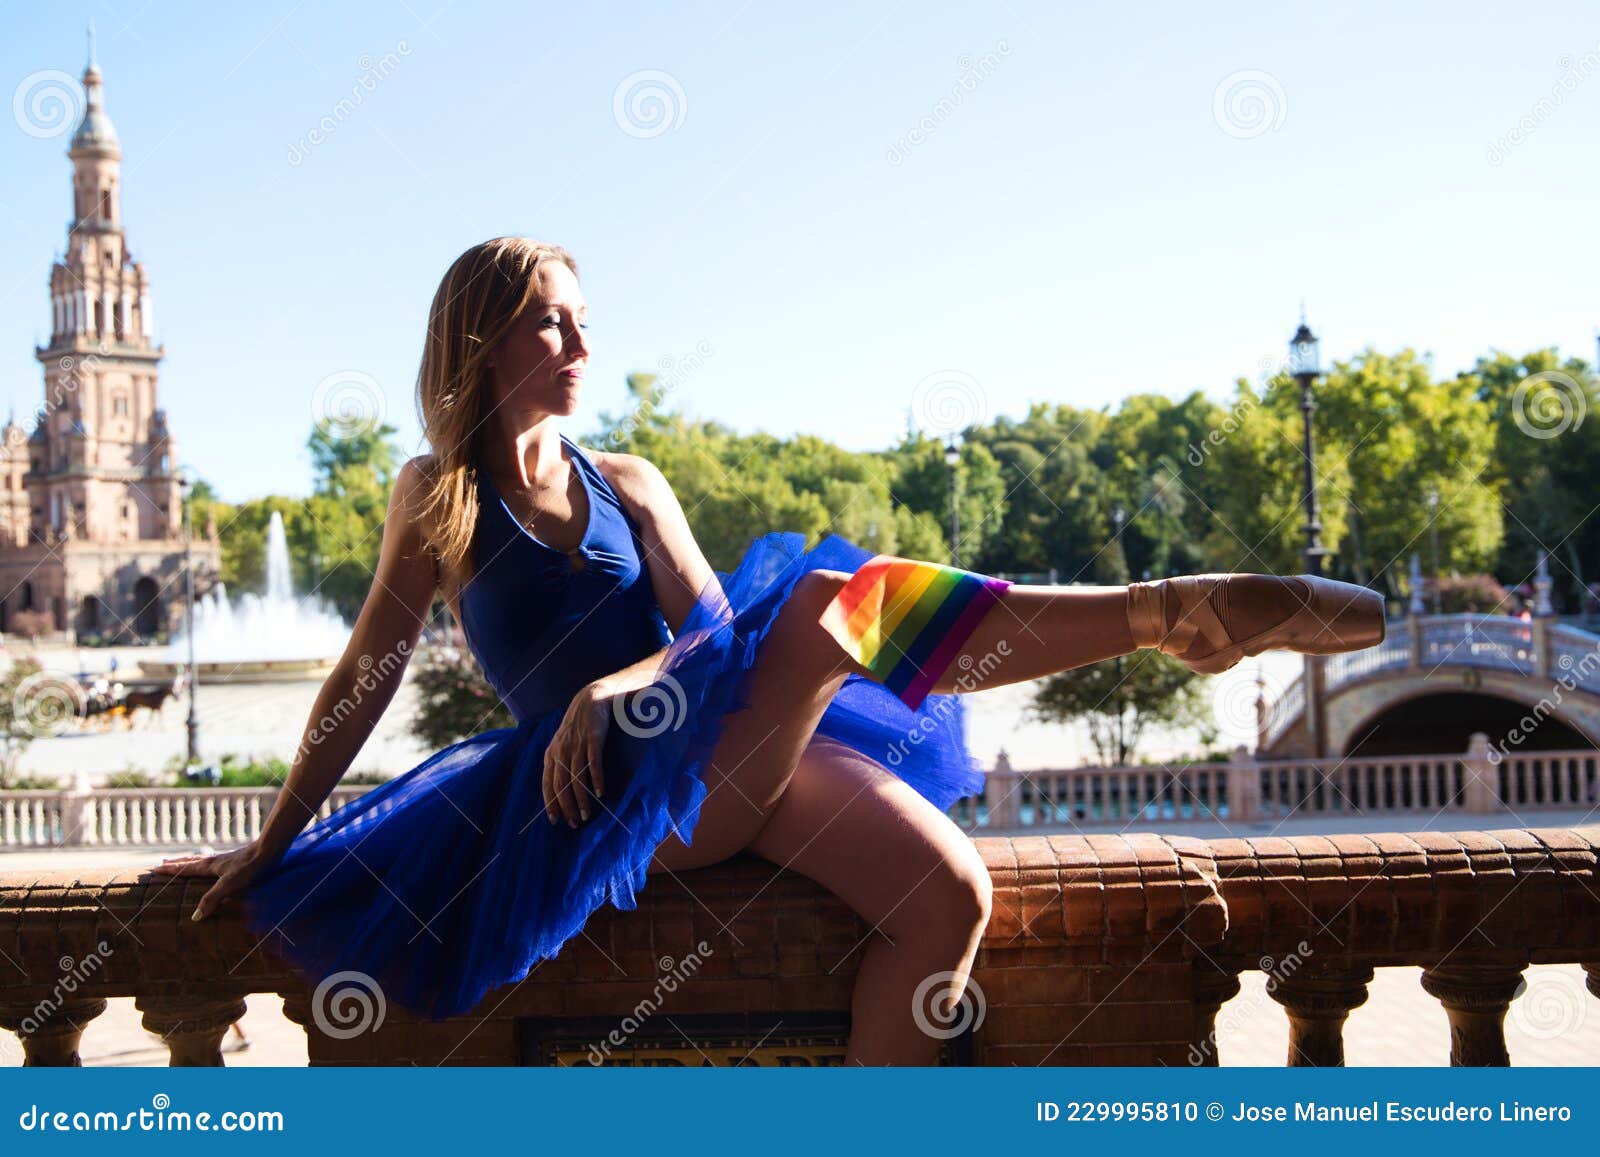 Classical Ballet Dancer And Lesbian Leaning On A Railing In A Park She Is Wearing The Gay Pride